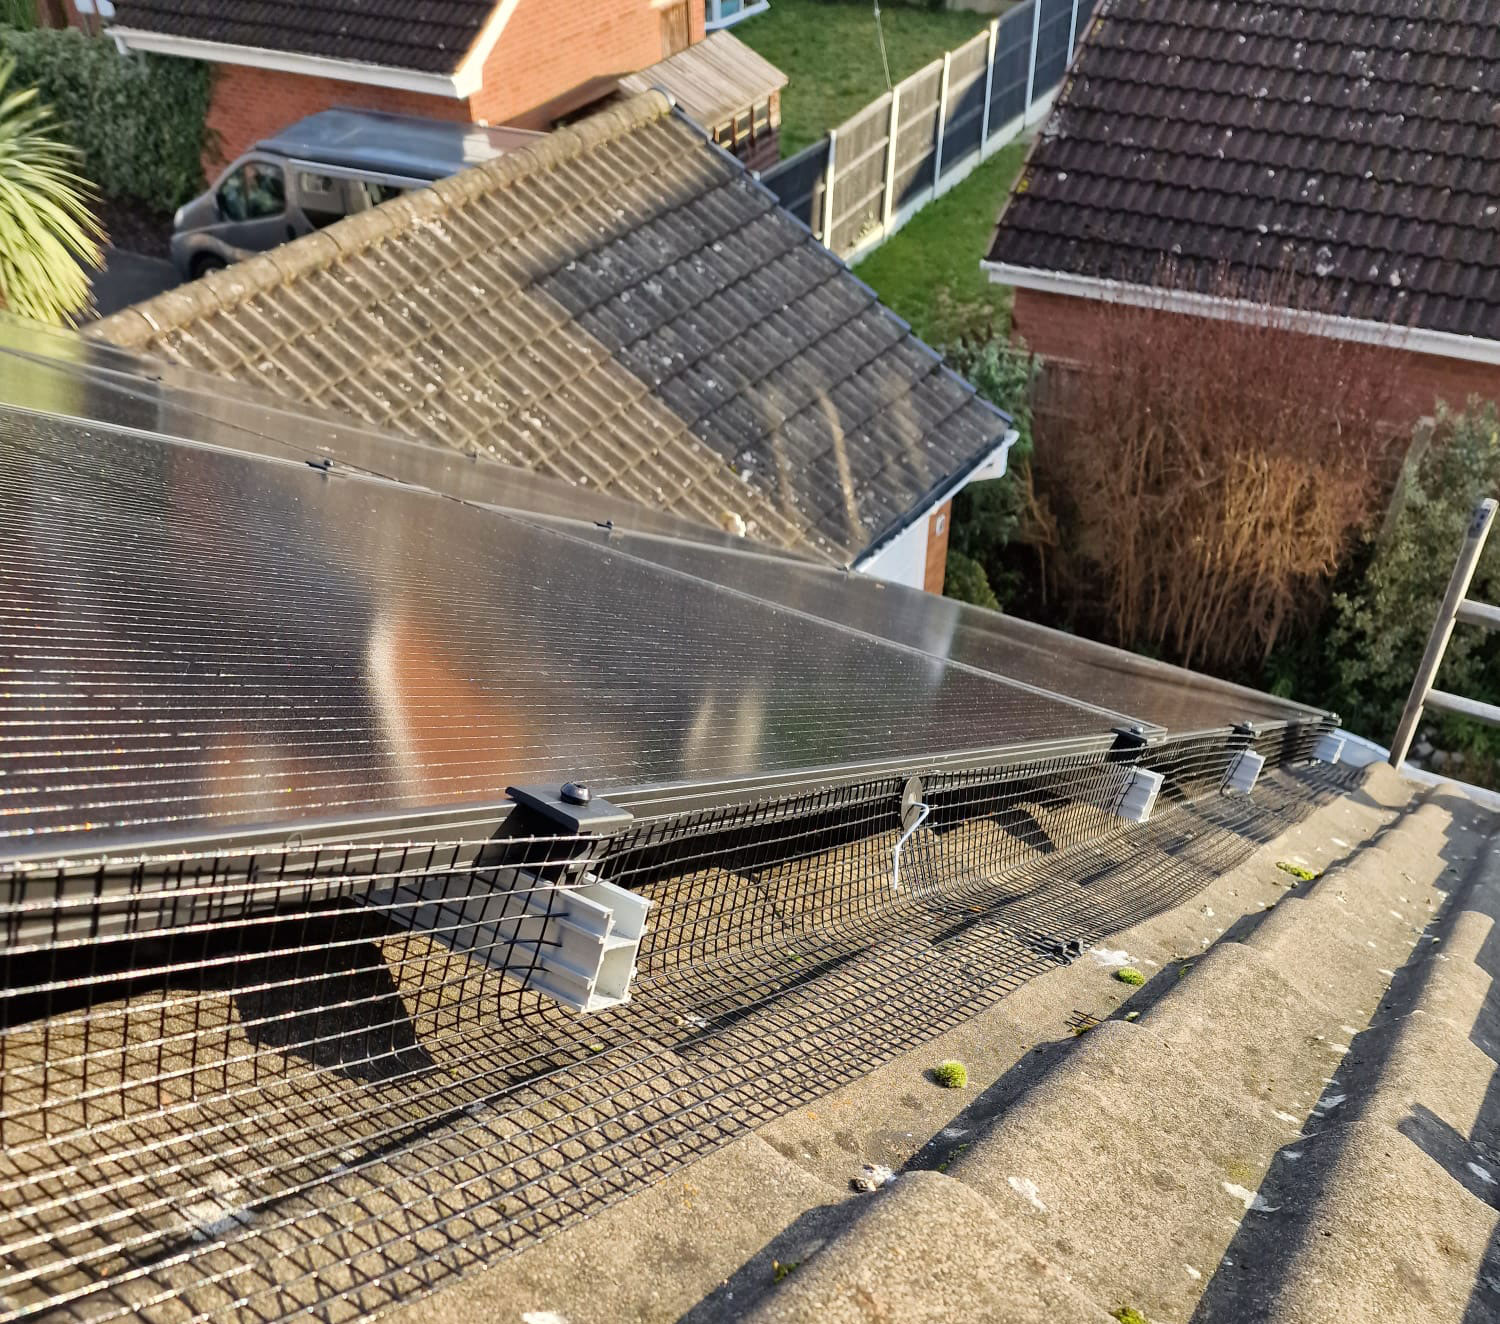 More+Solar+Panels+Pigeon+Proofed+in+Bramcote